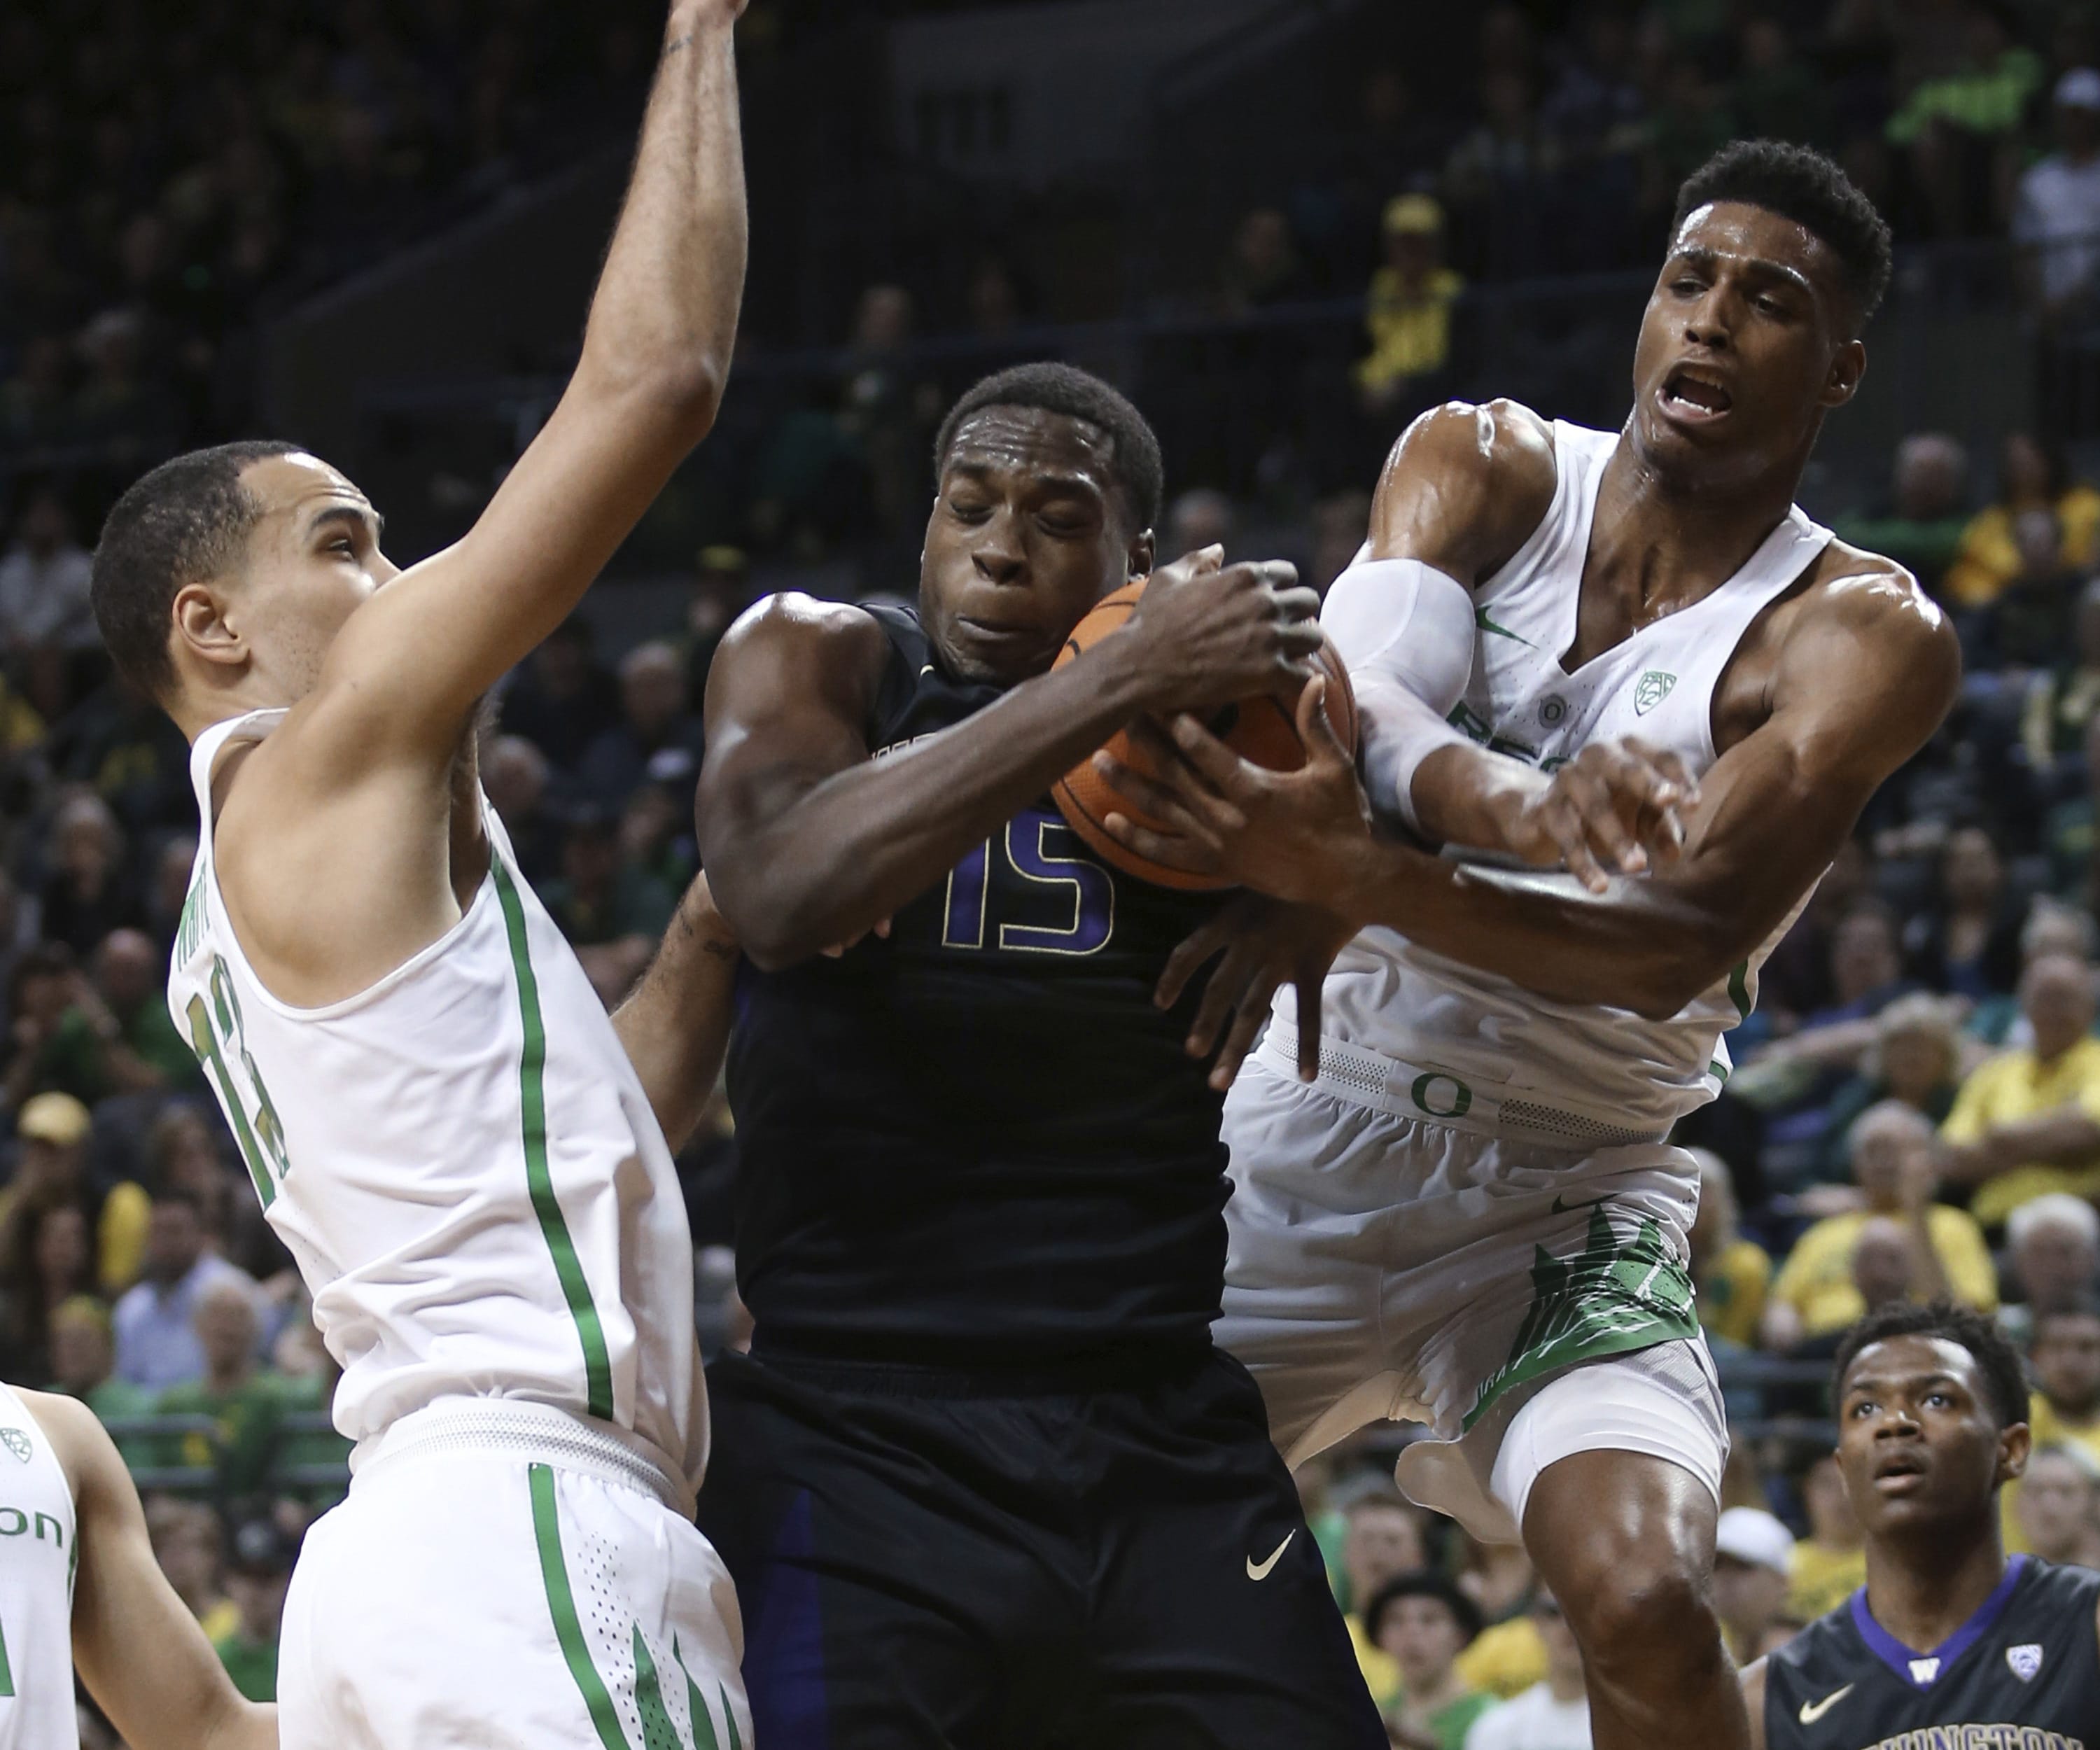 Oregon's Paul White, left, watches as temmate Kenny Wooten, right, works against Washington's Noah Dickerson for a rebound during the first half of an NCAA college basketball game Thursday, Feb. 8, 2018, in Eugene, Ore.